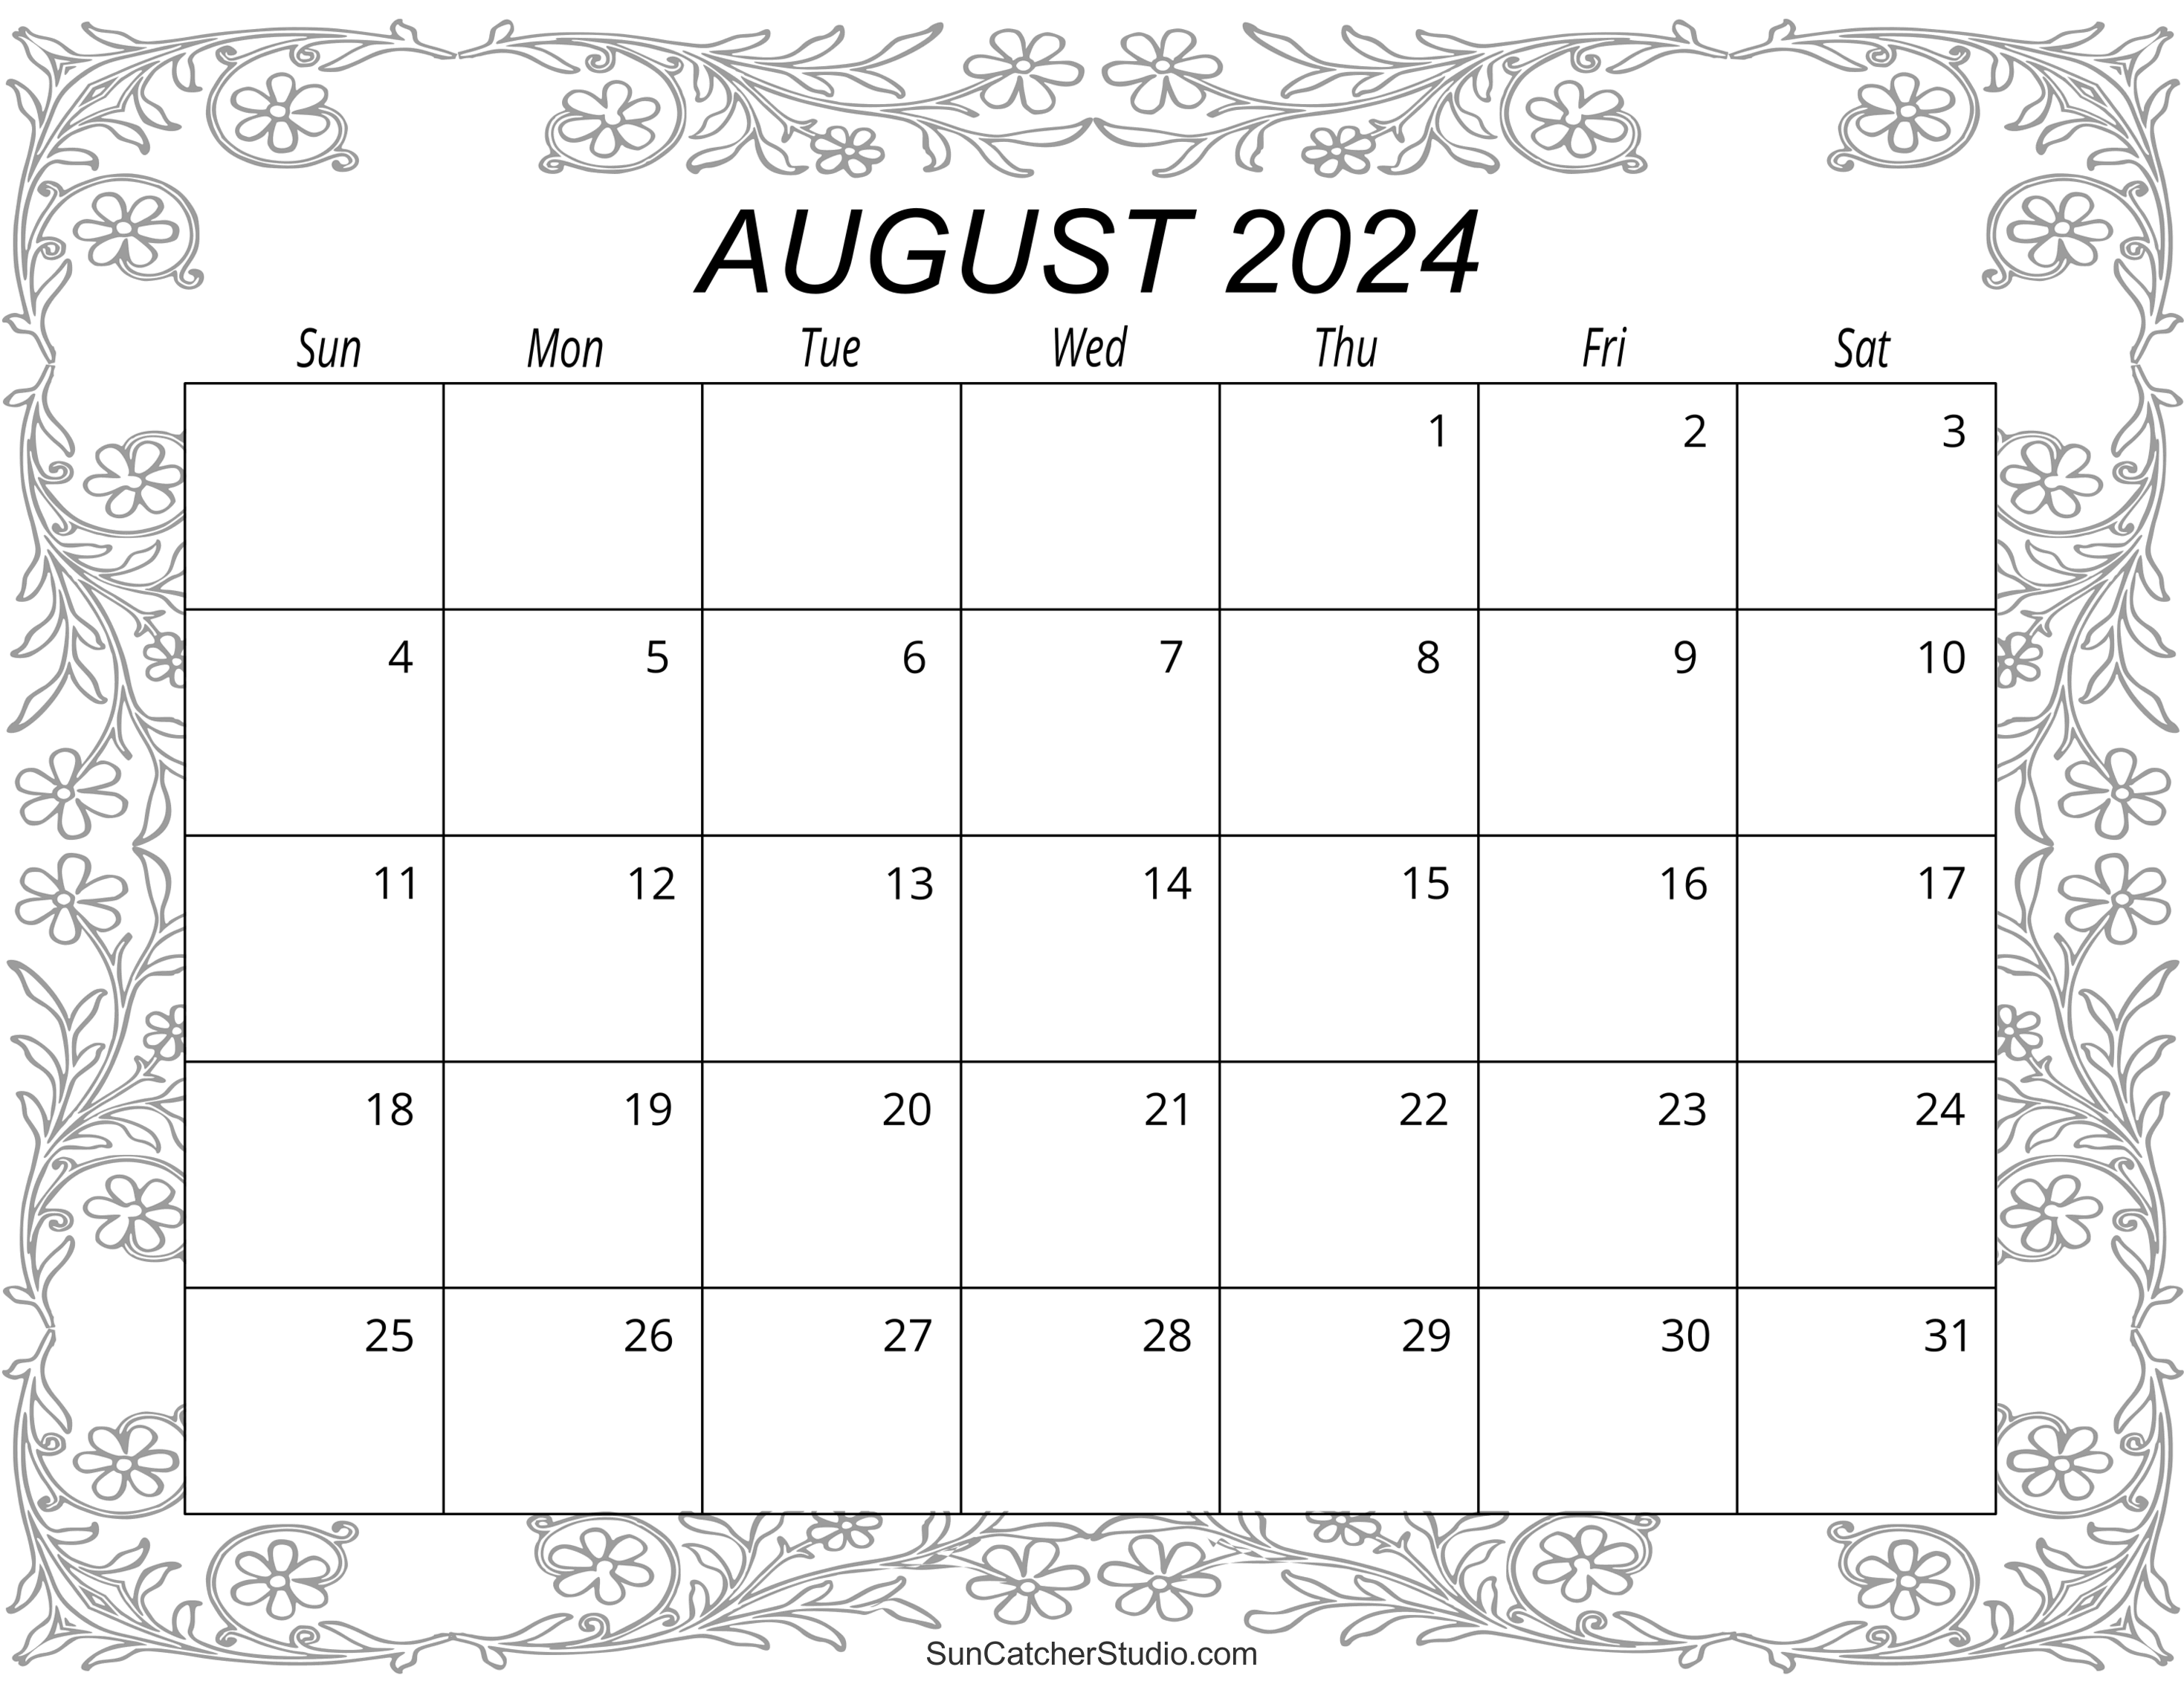 August 2024 Calendar (Free Printable) – Diy Projects, Patterns pertaining to Free Printable Black And White August 2024 Calendar